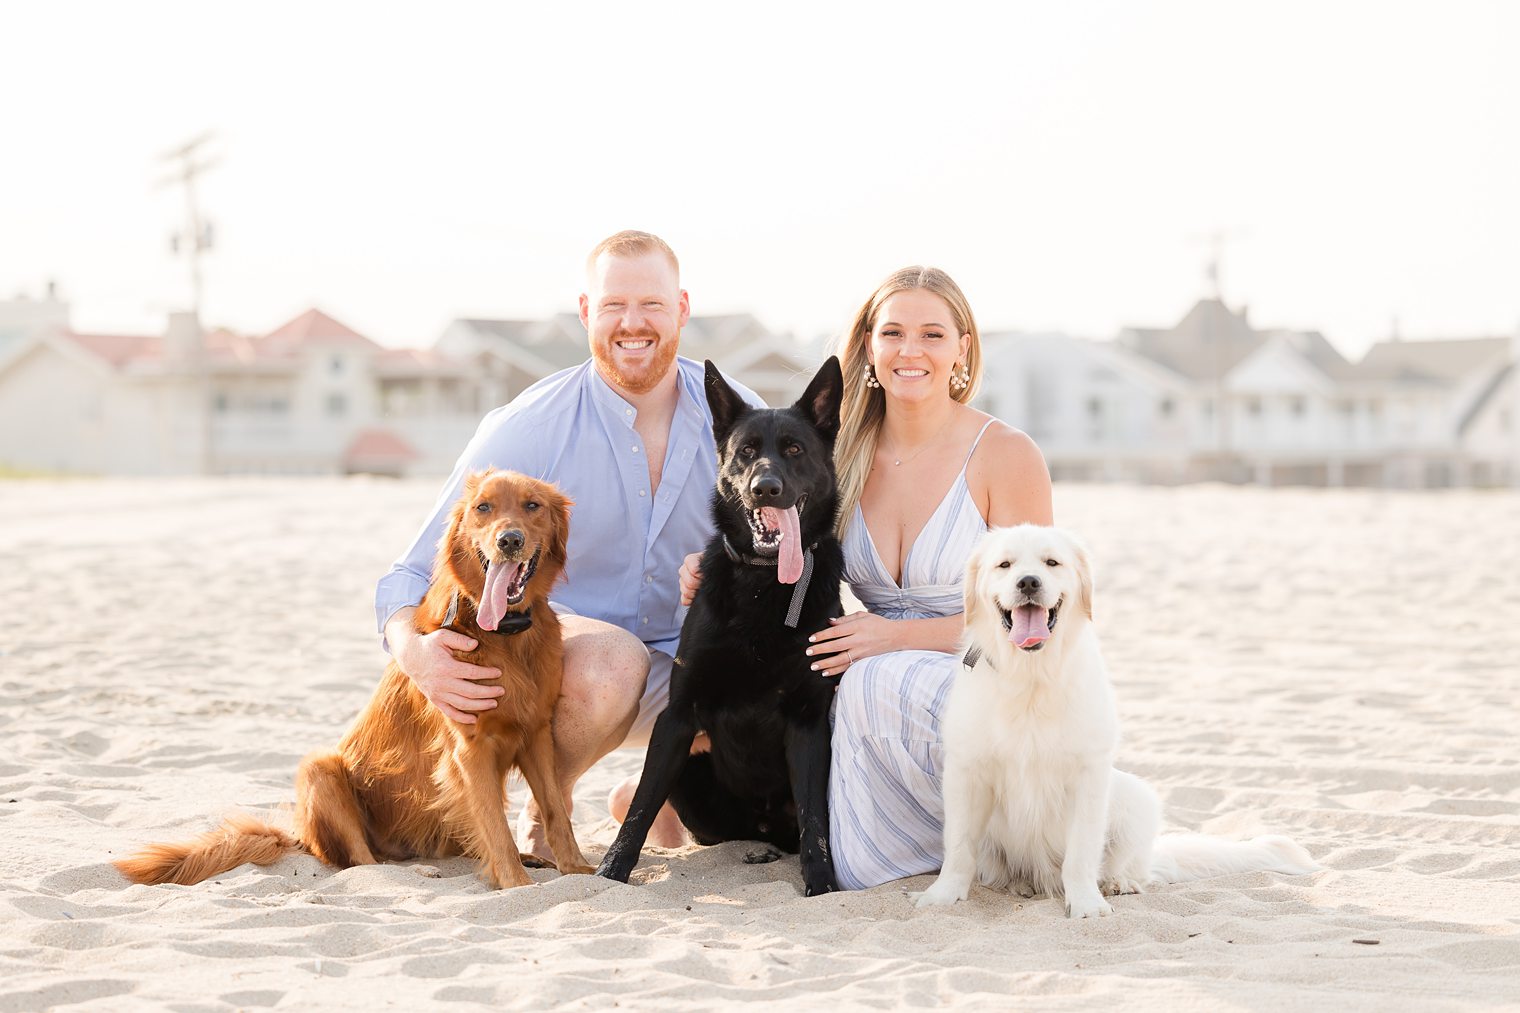 Future Mr and Mrs enjoying their beach day with their fur babies